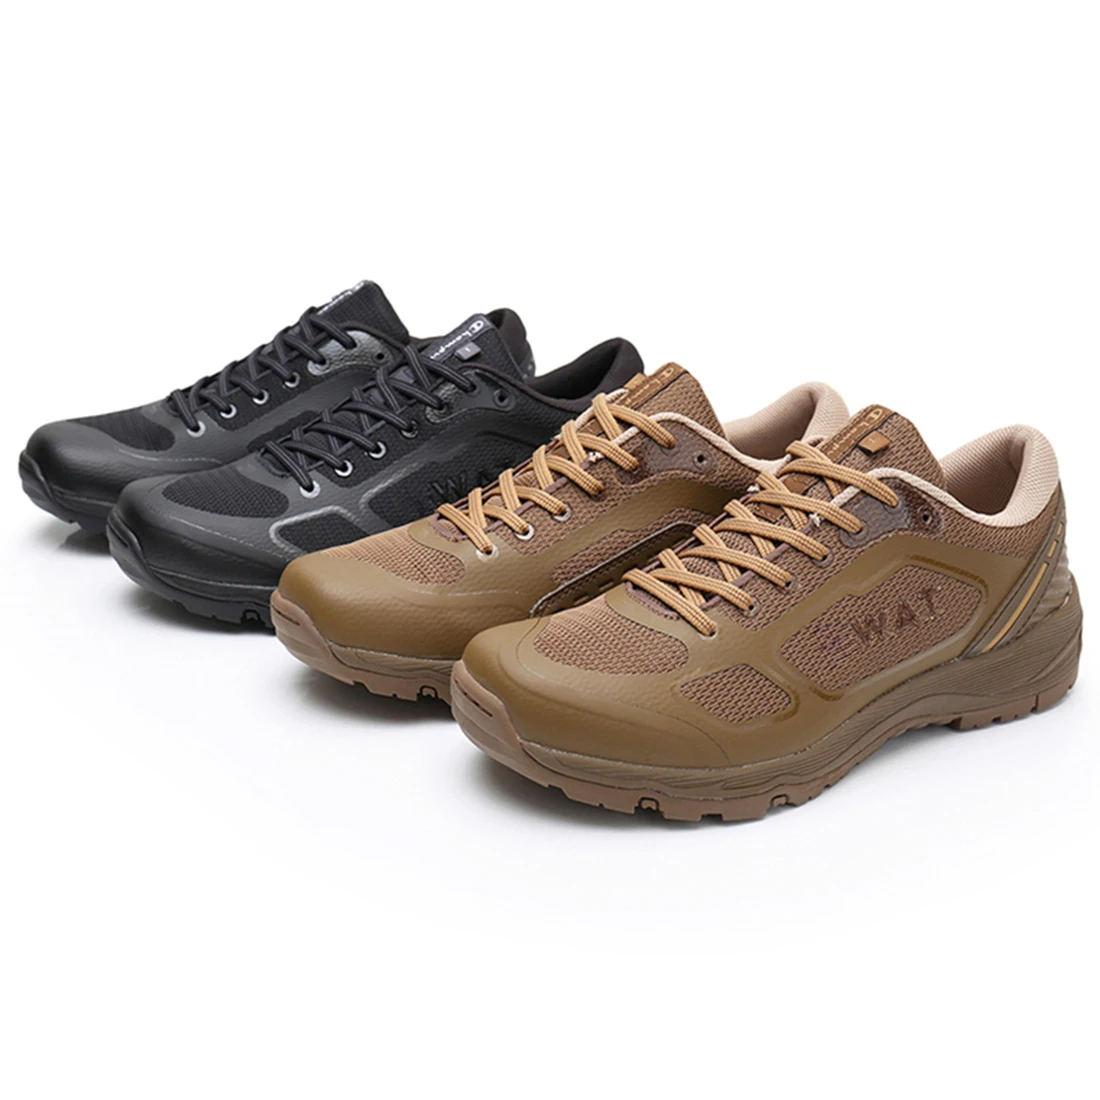 Workerkit Breathable Low-top Tactical Summer Training Shoes Outdoor Running Hiking Shoes